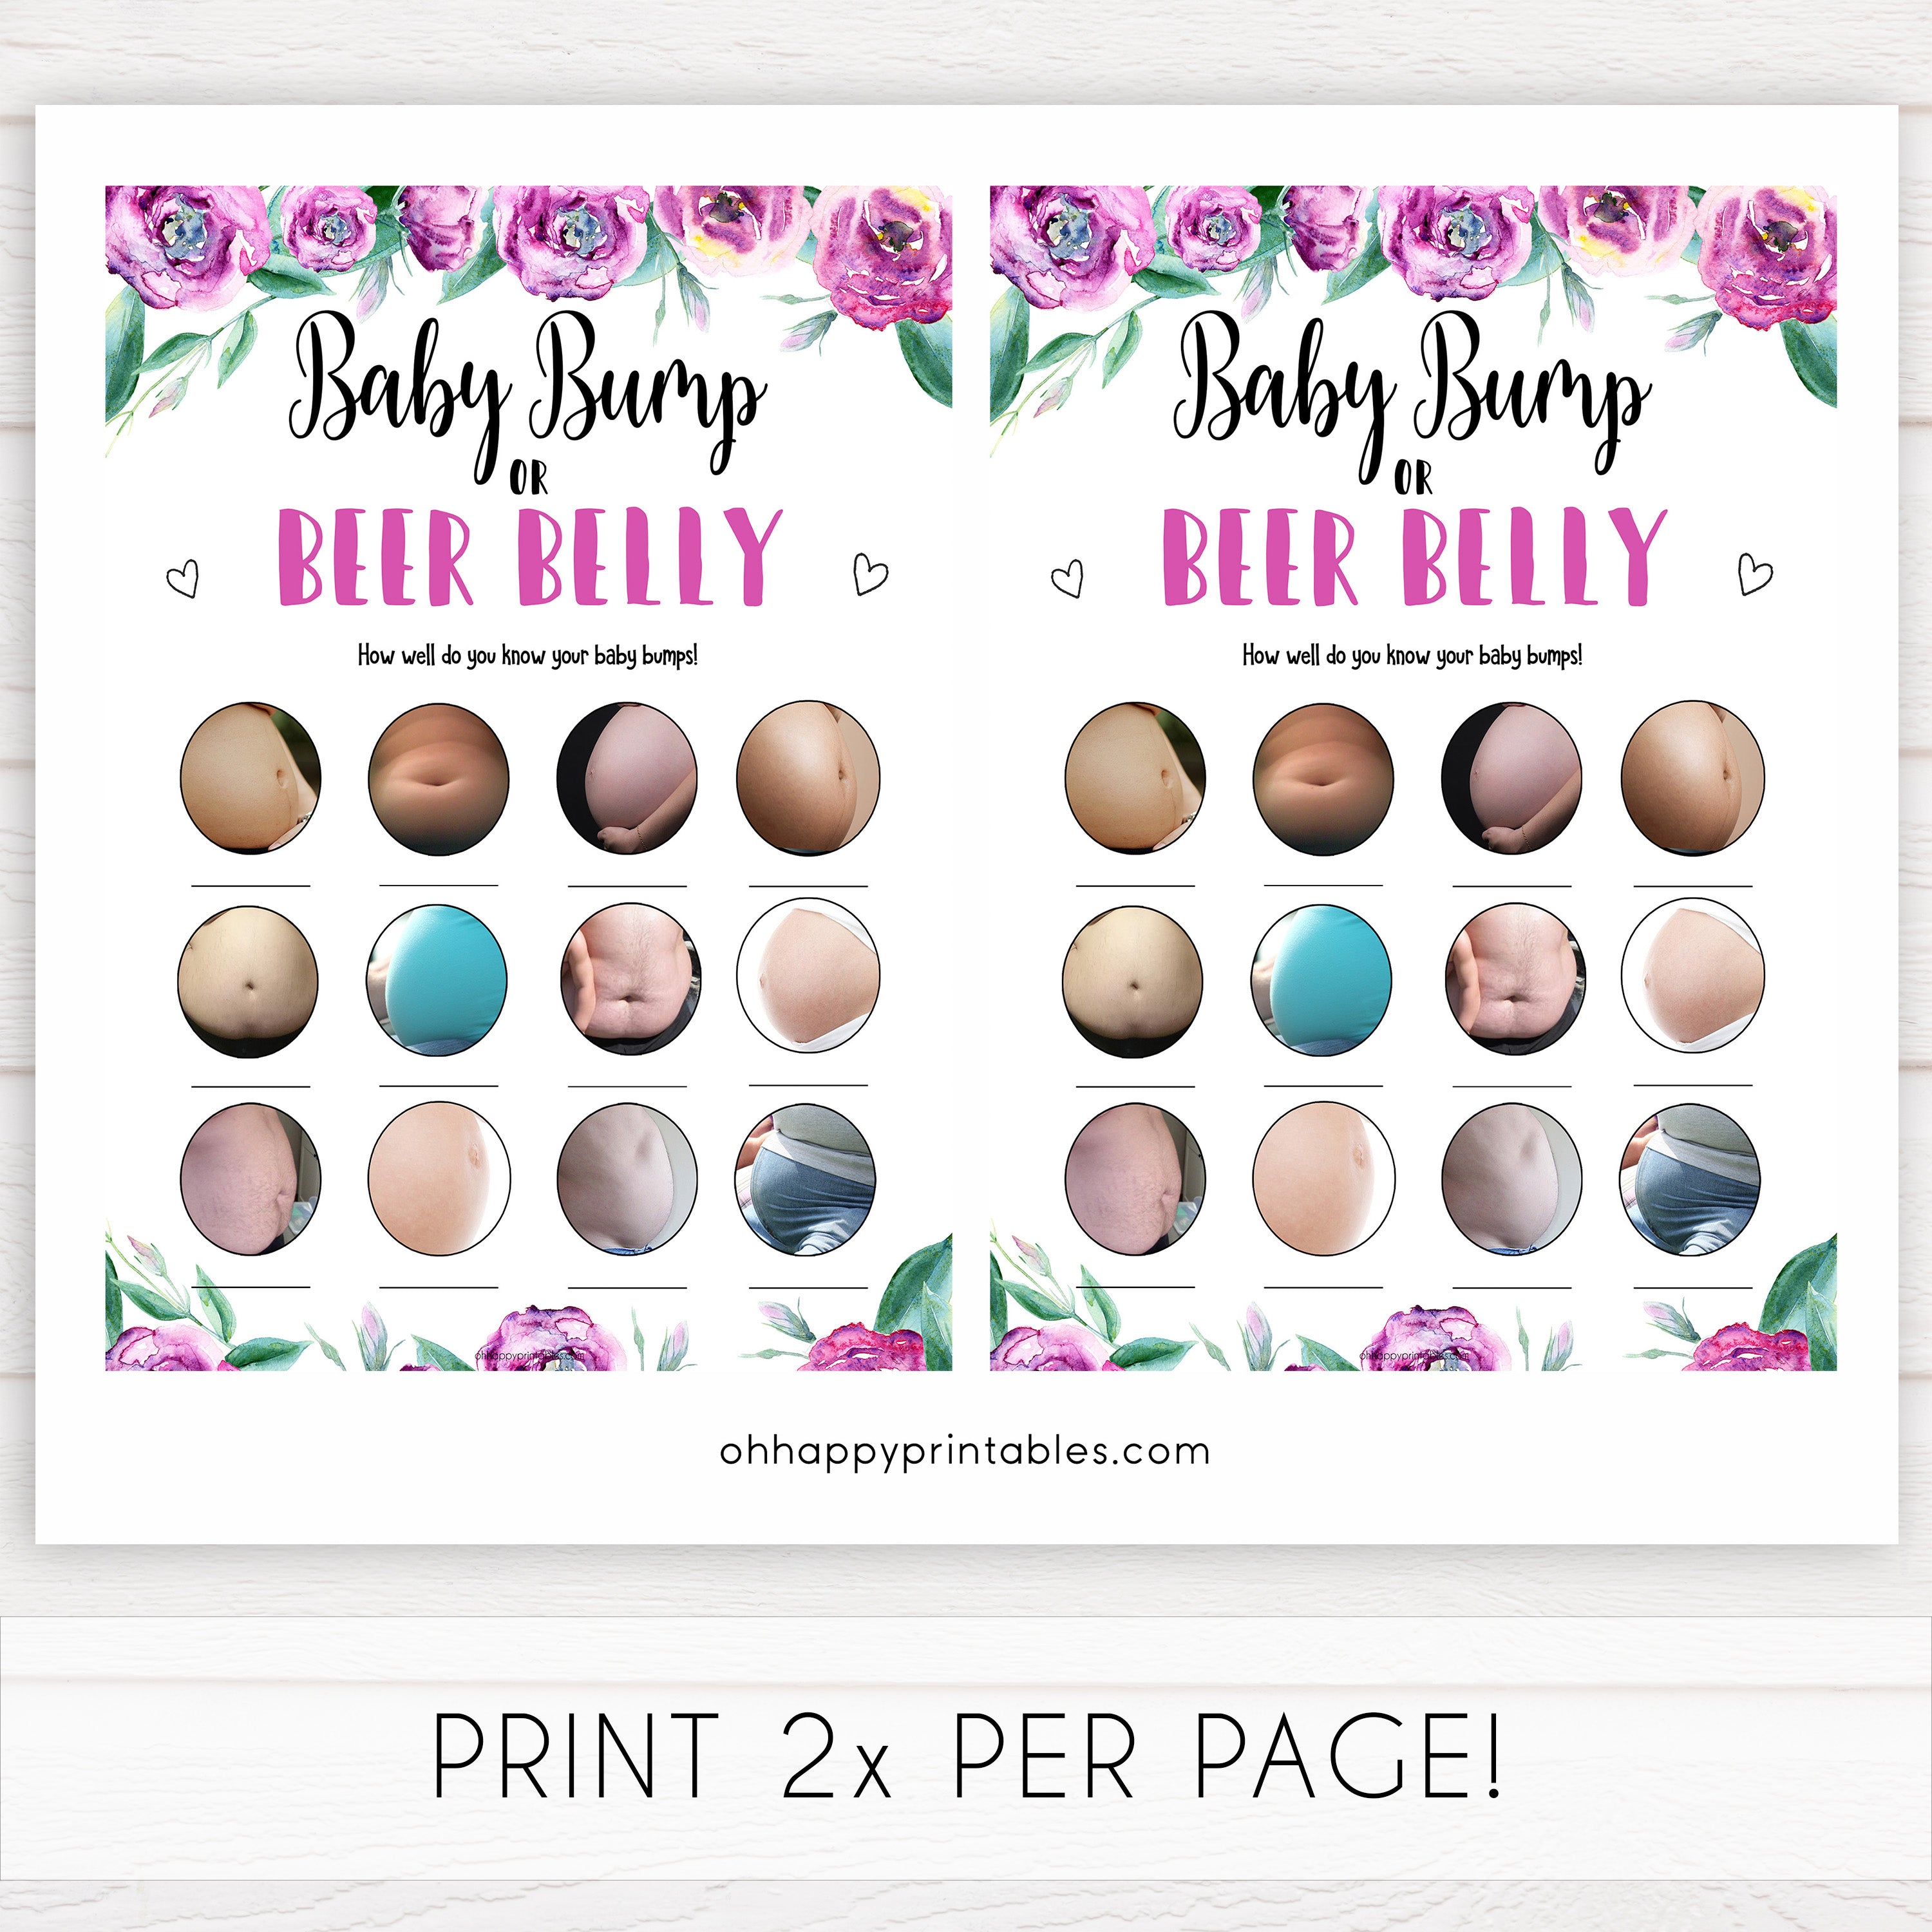 Purple peonies baby bump or beer belly baby shower games, printable baby shower games, fun baby shower games, baby shower games, popular baby shower games, floral baby shower games, purple baby shower themes